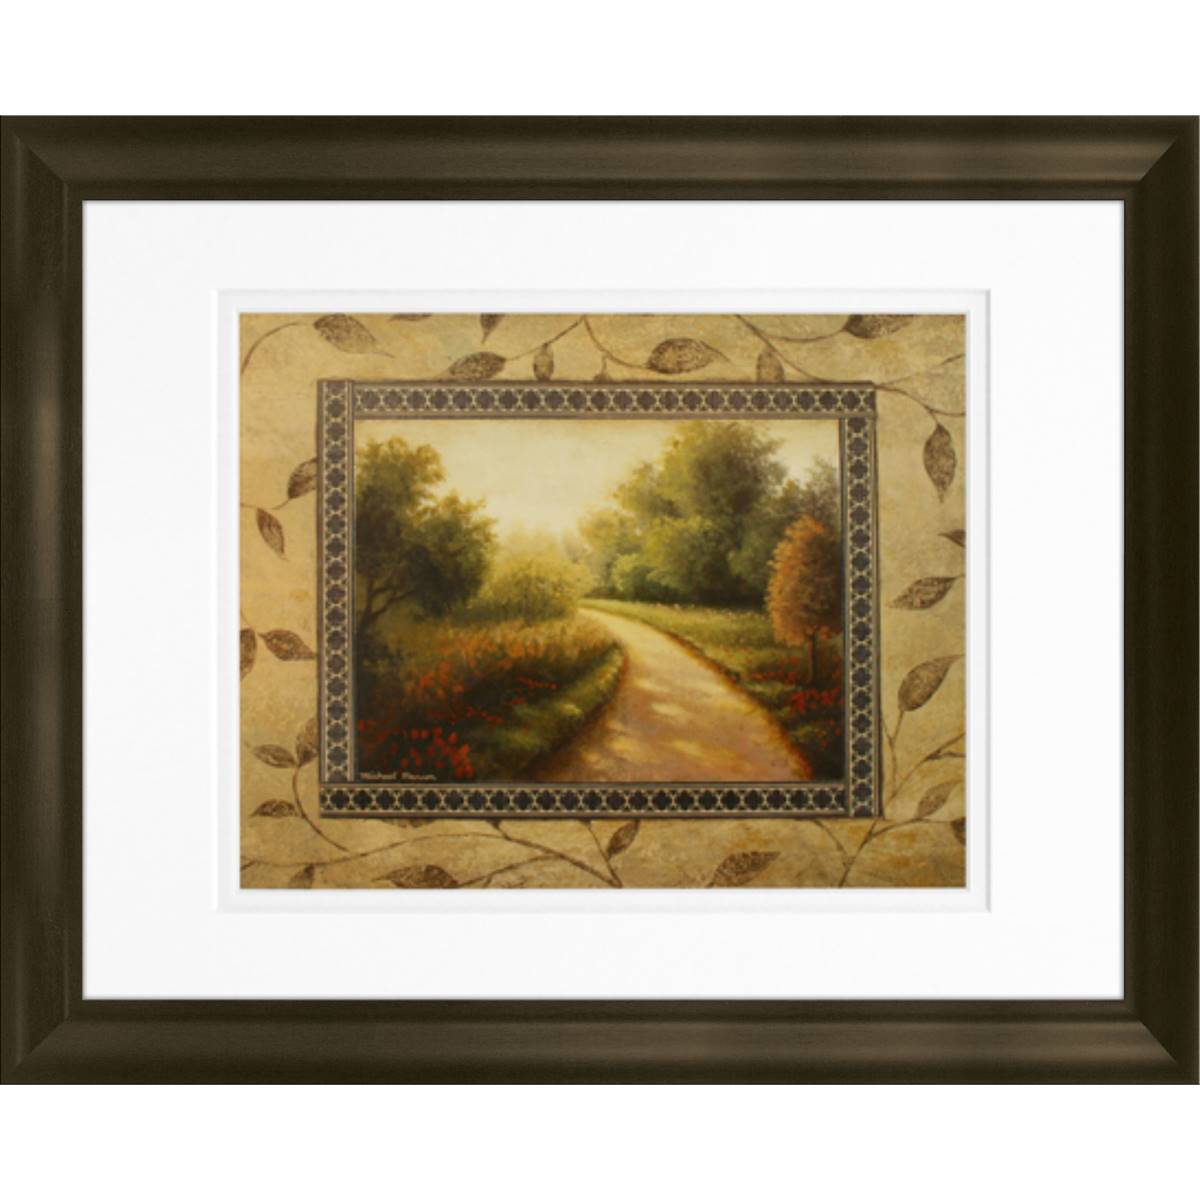 Timeless Frames(R) New Country Road Framed Wall Art - 11x14